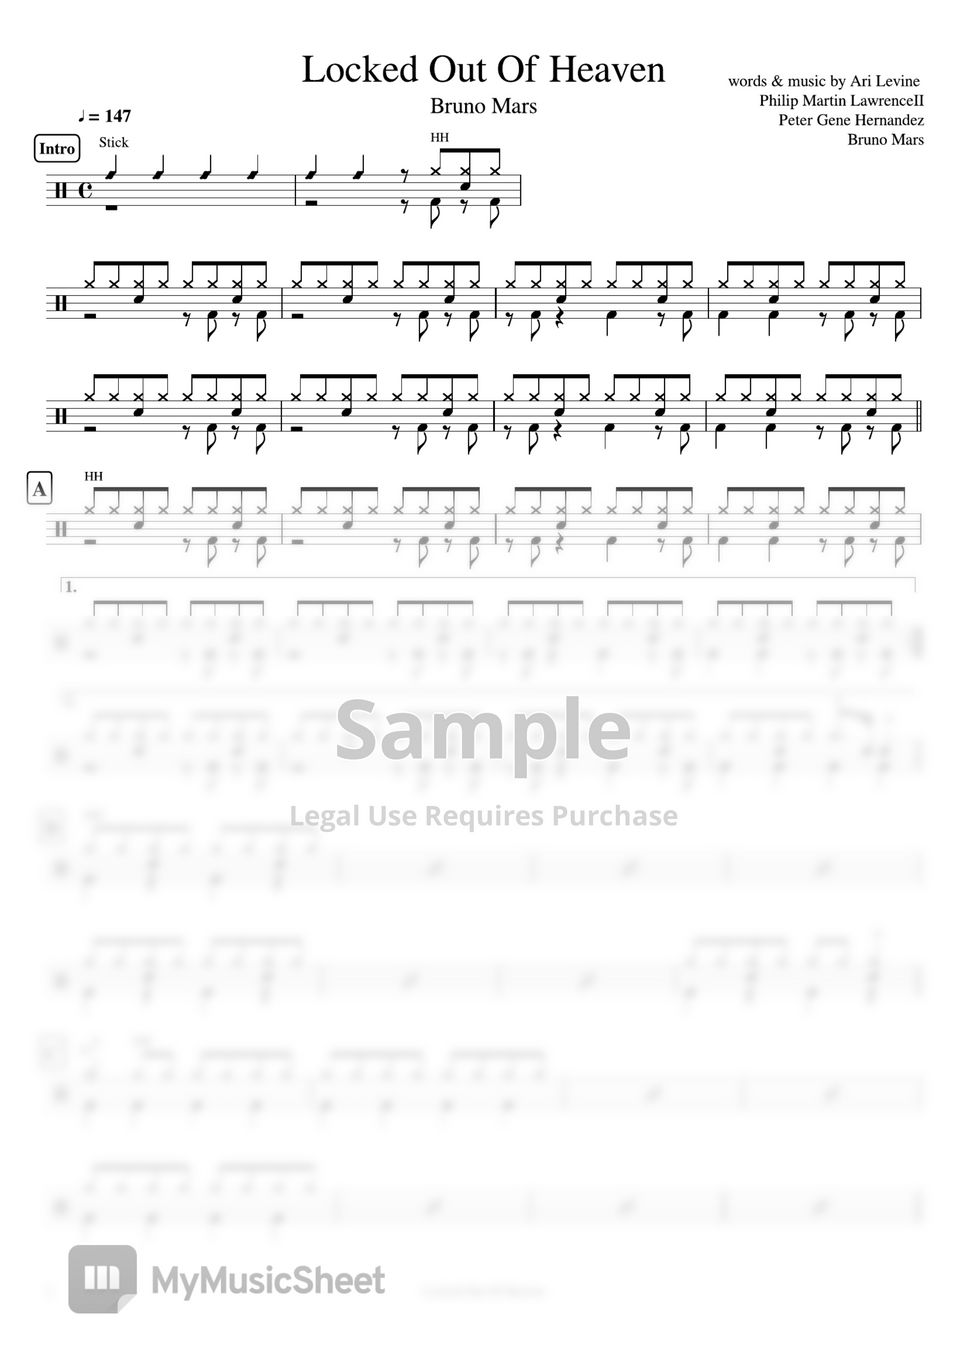 Bruno Mars - Locked Out Of Heaven by Cookai's J-pop Drum sheet music!!!